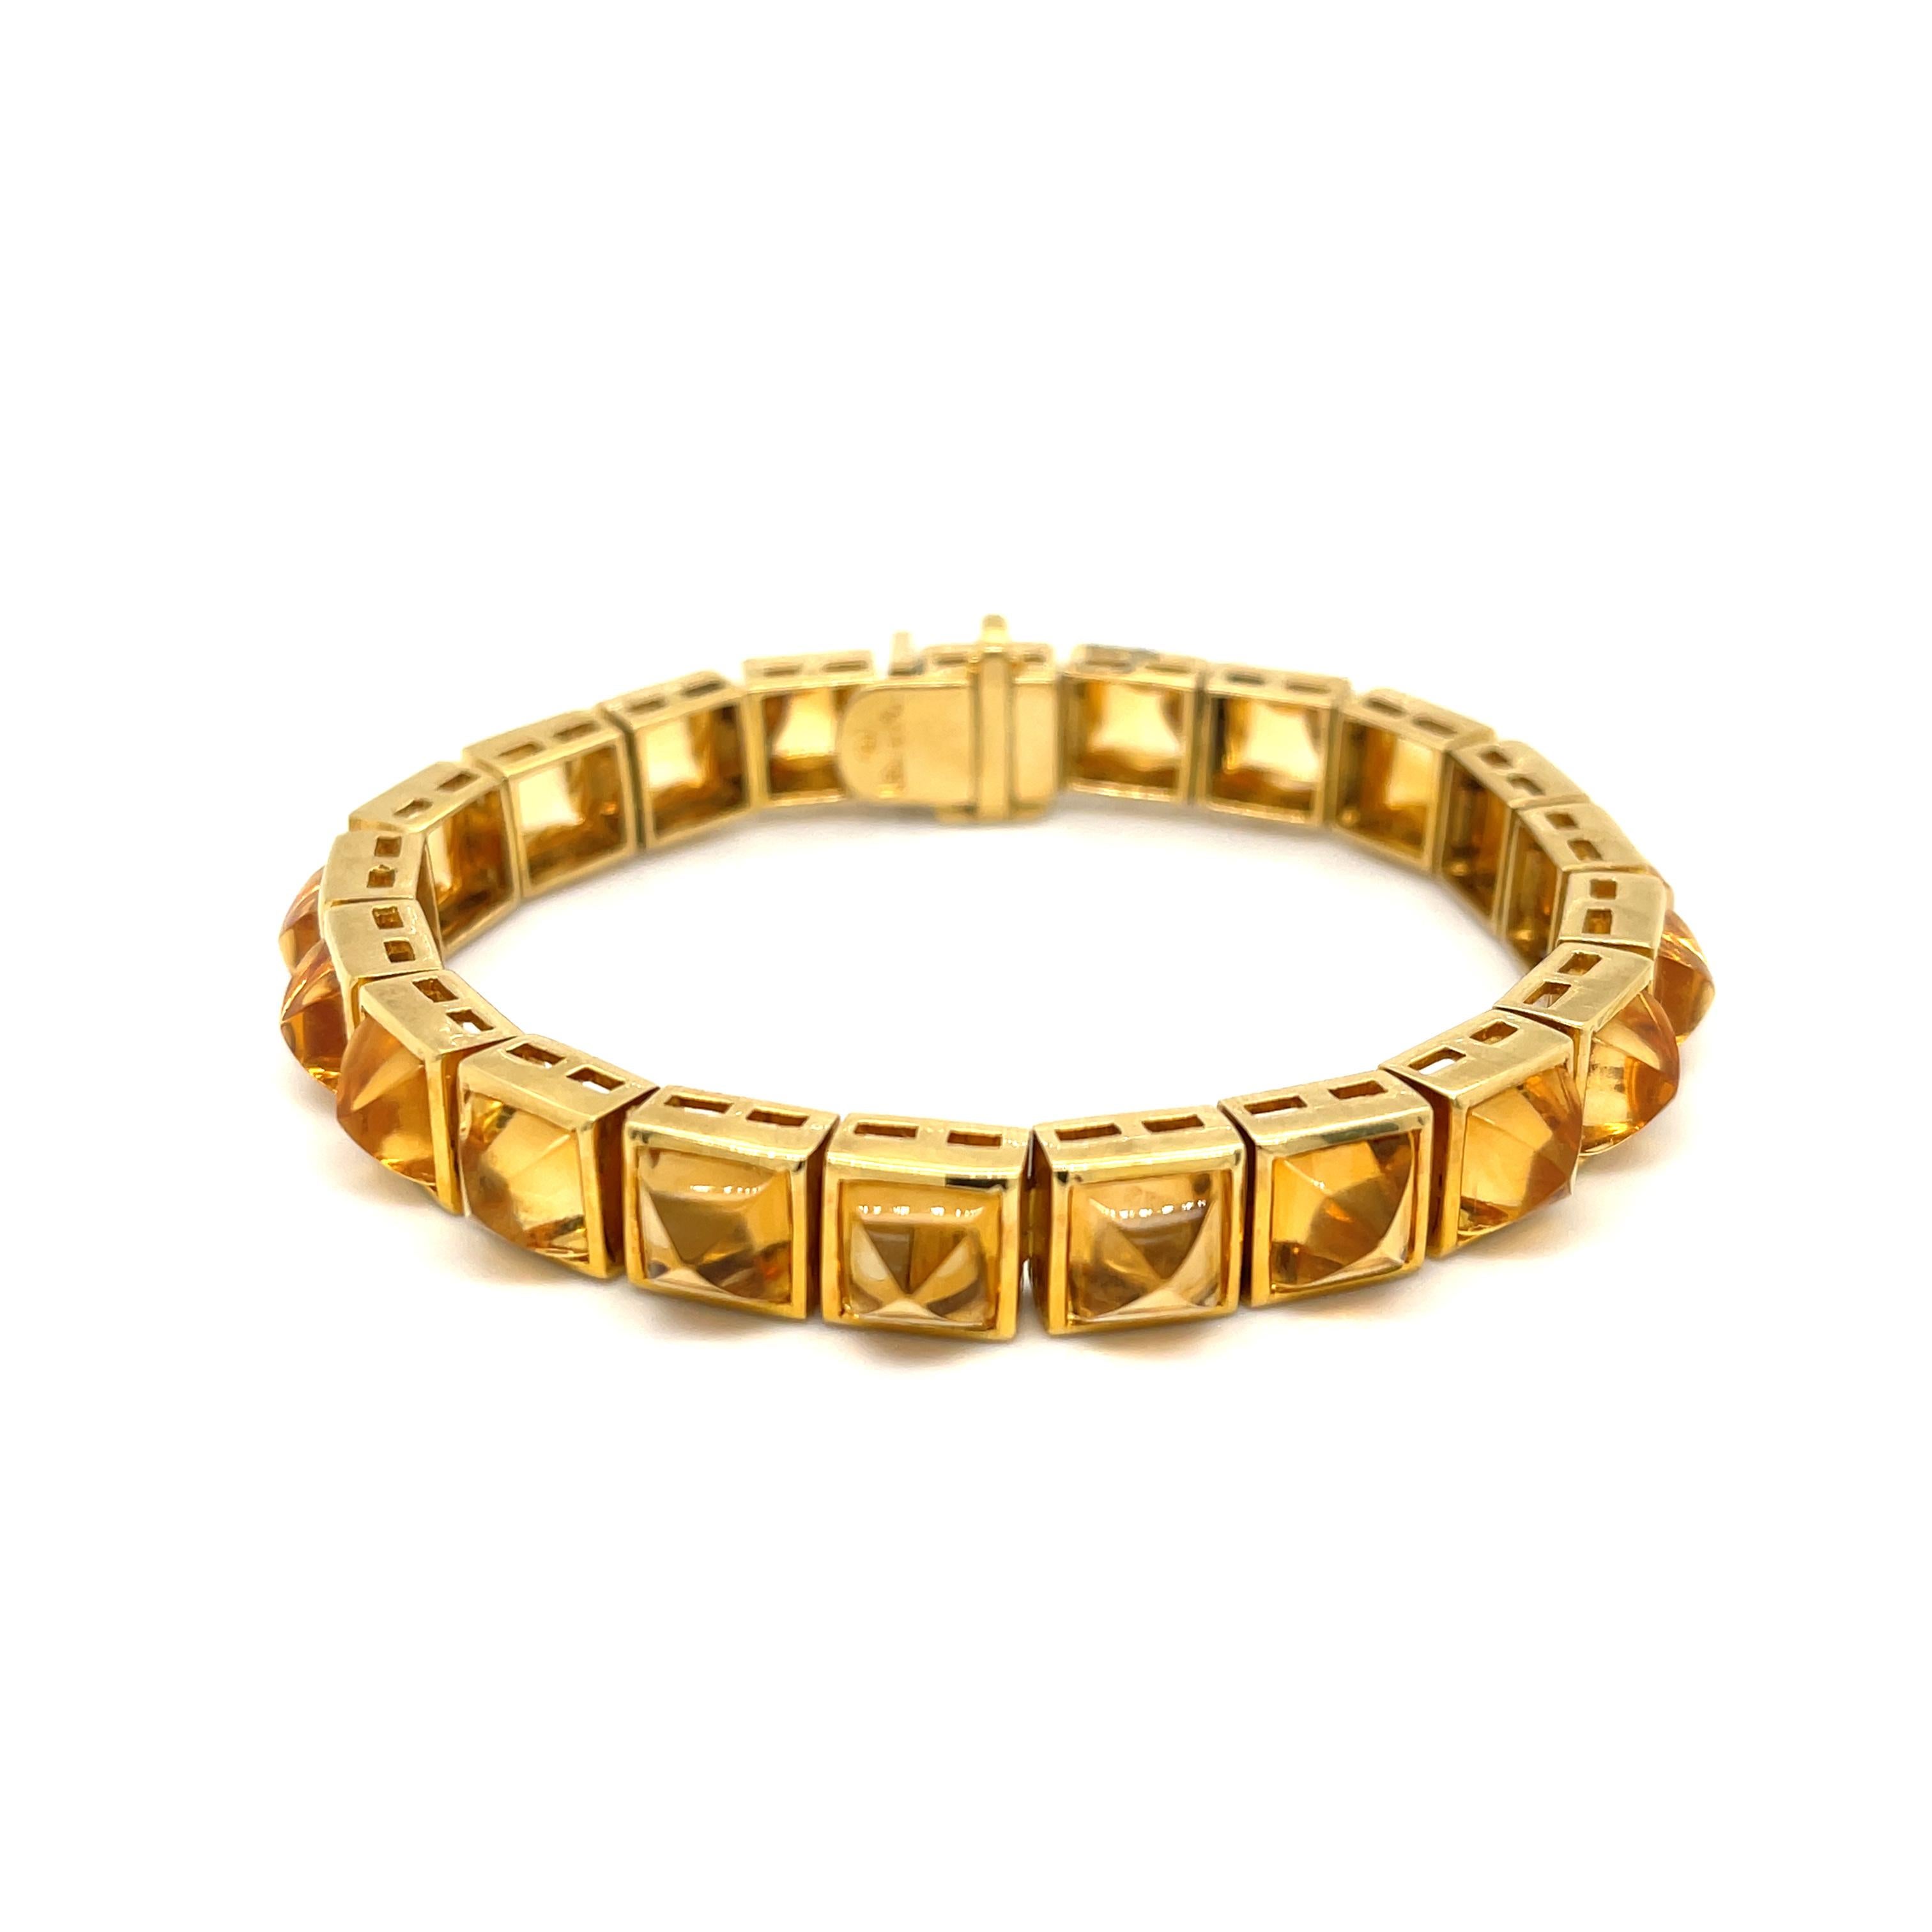 Laura Munder Citrine Bracelet 18k Yellow Gold In Good Condition For Sale In Dallas, TX